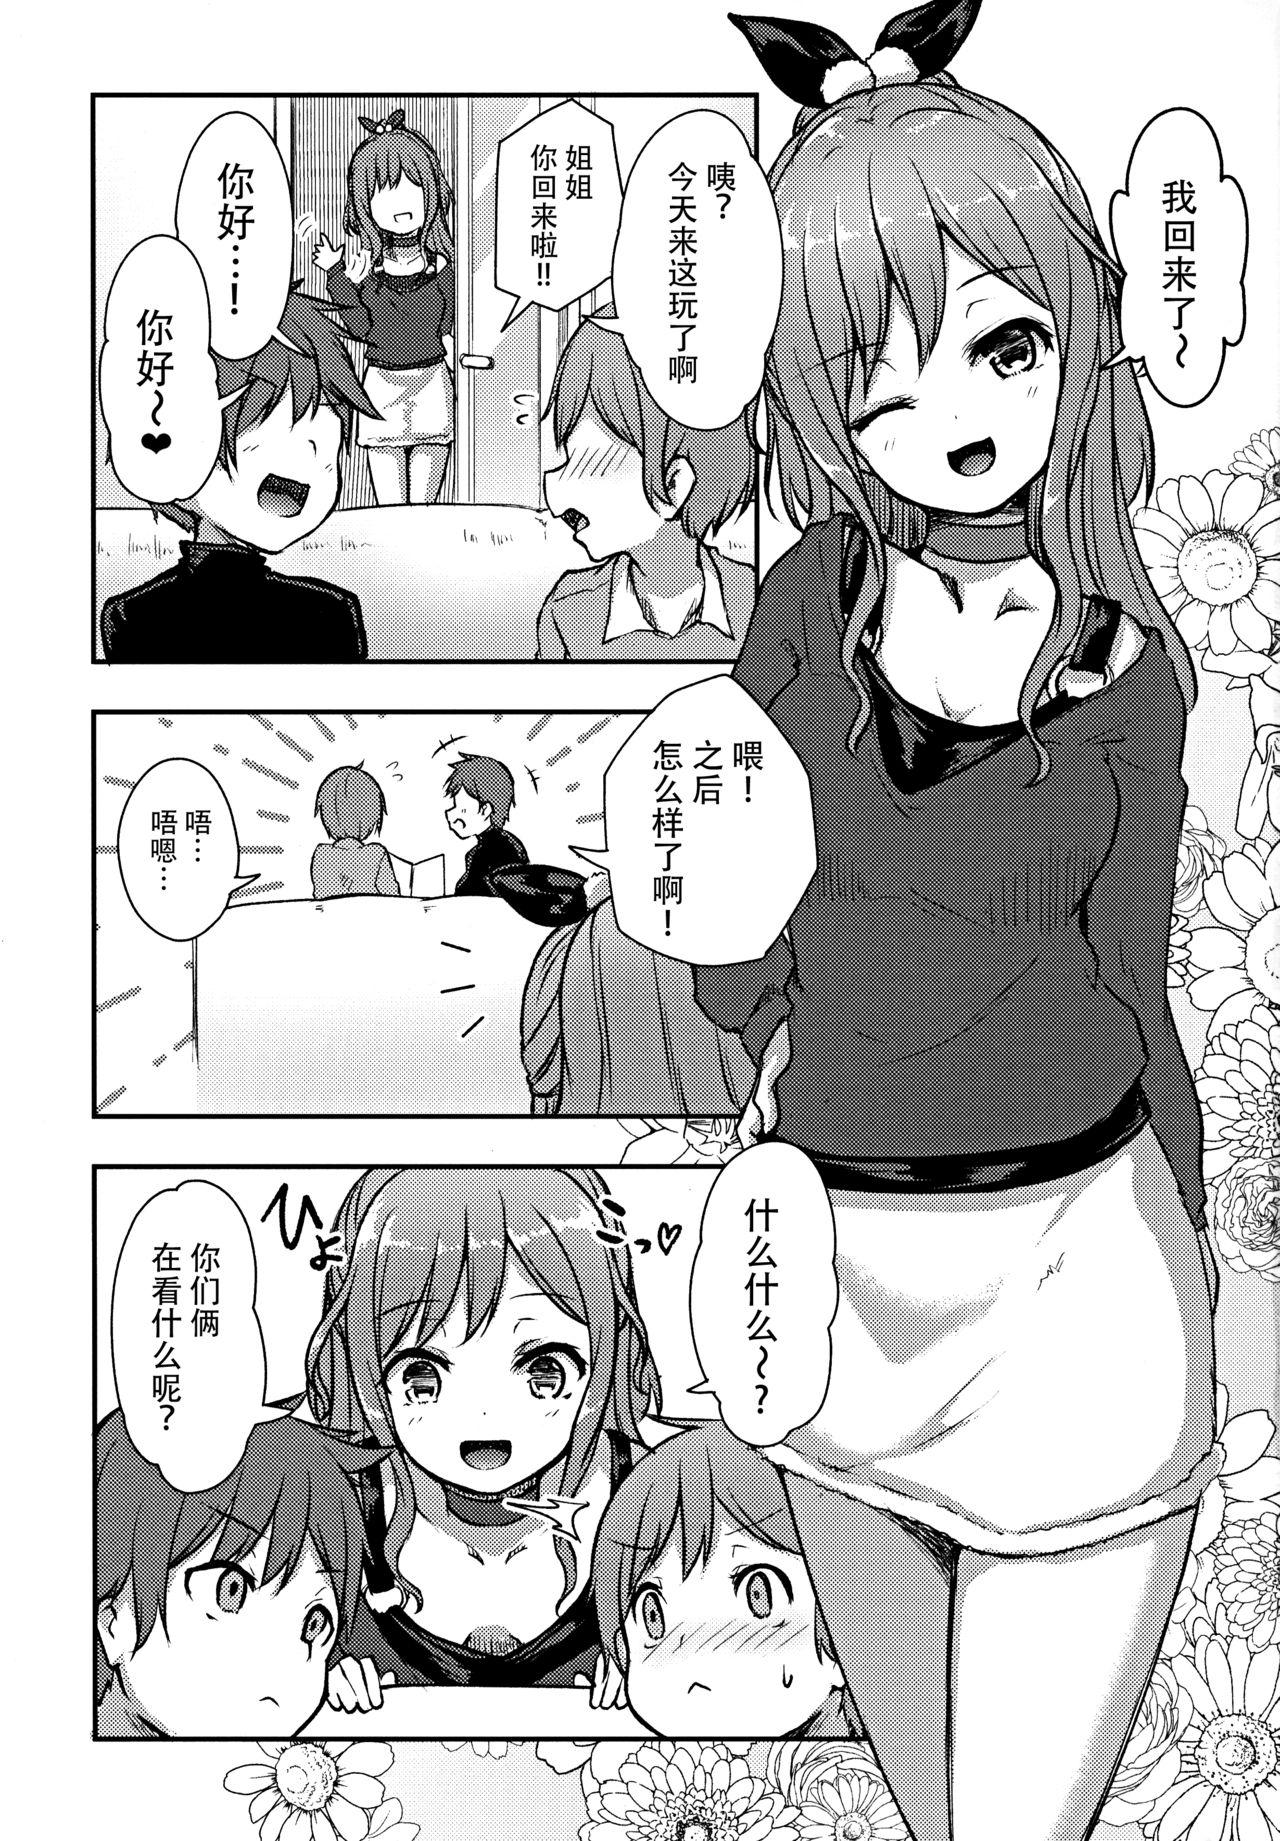 Dad Hearty Hybrid Household - Bang dream Gay Hunks - Page 3